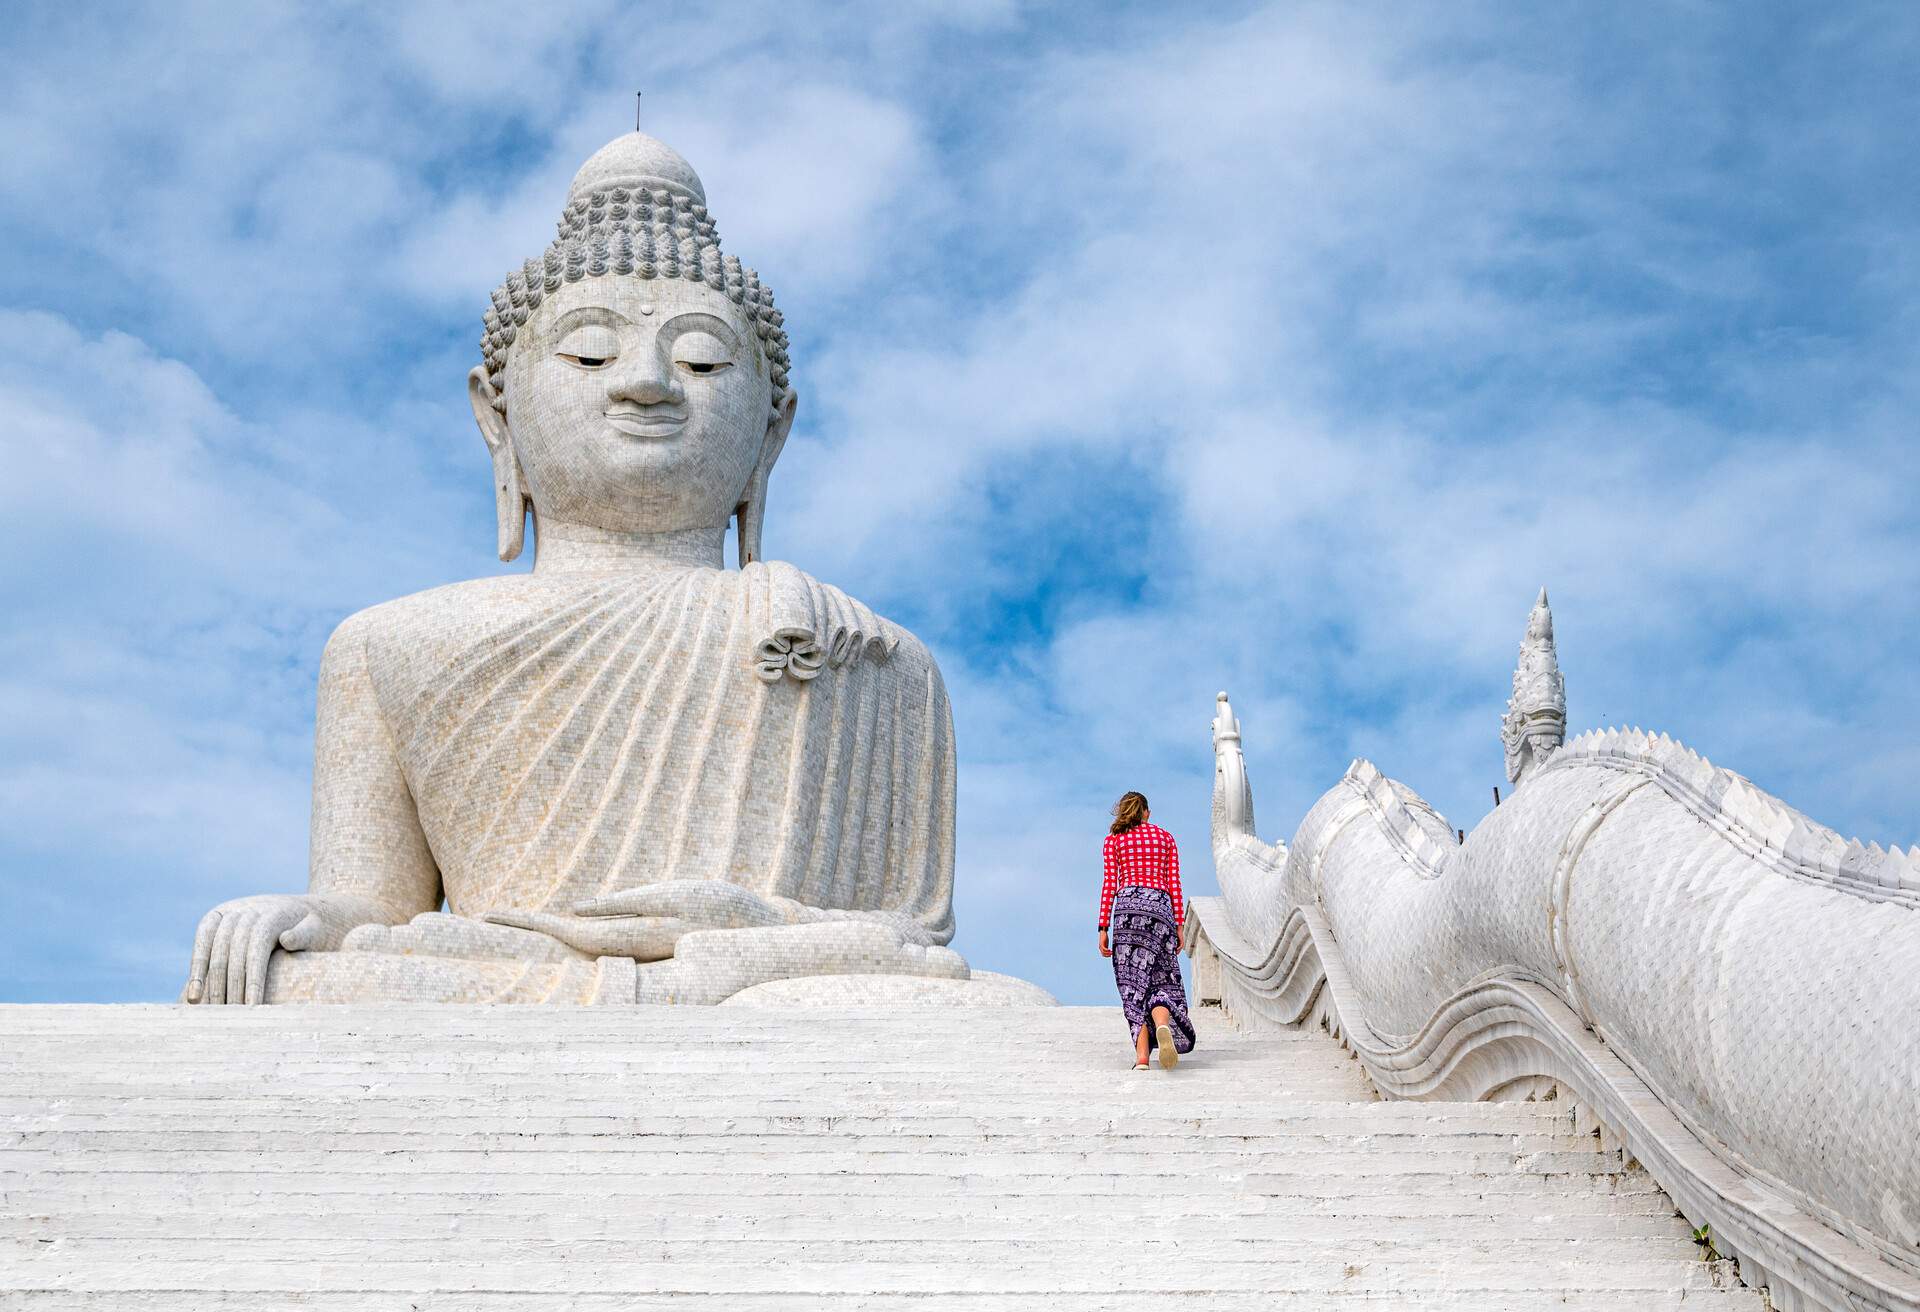 13 years old girl climbing the stairs to White marble statue of  Big Buddha in Phuket,Thailand